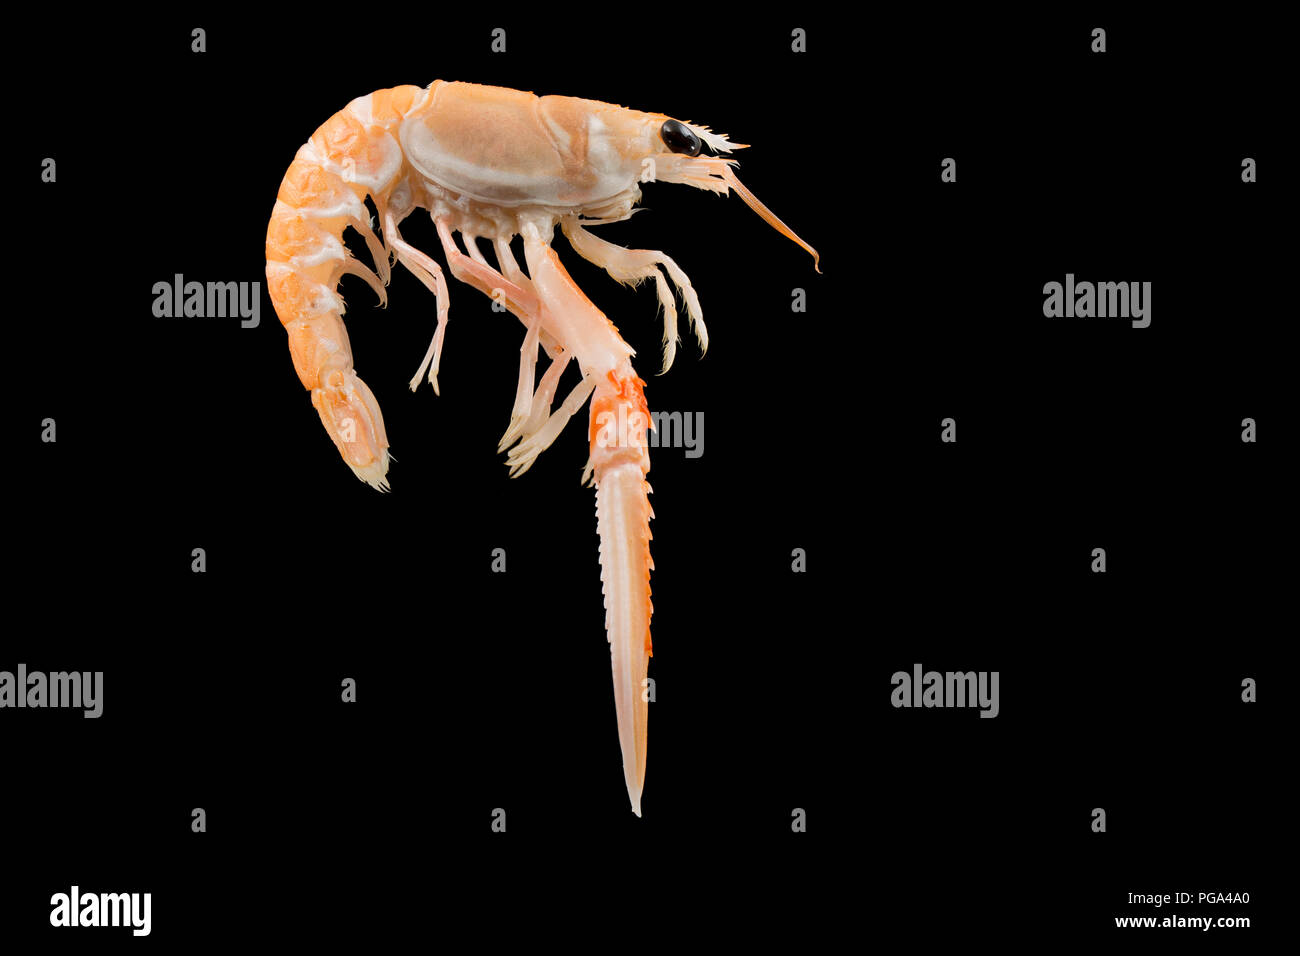 A single raw, uncooked Scottish langoustine, Nephrops norvegicus, bought from a supermarket and photographed in a studio on a black background. The la Stock Photo